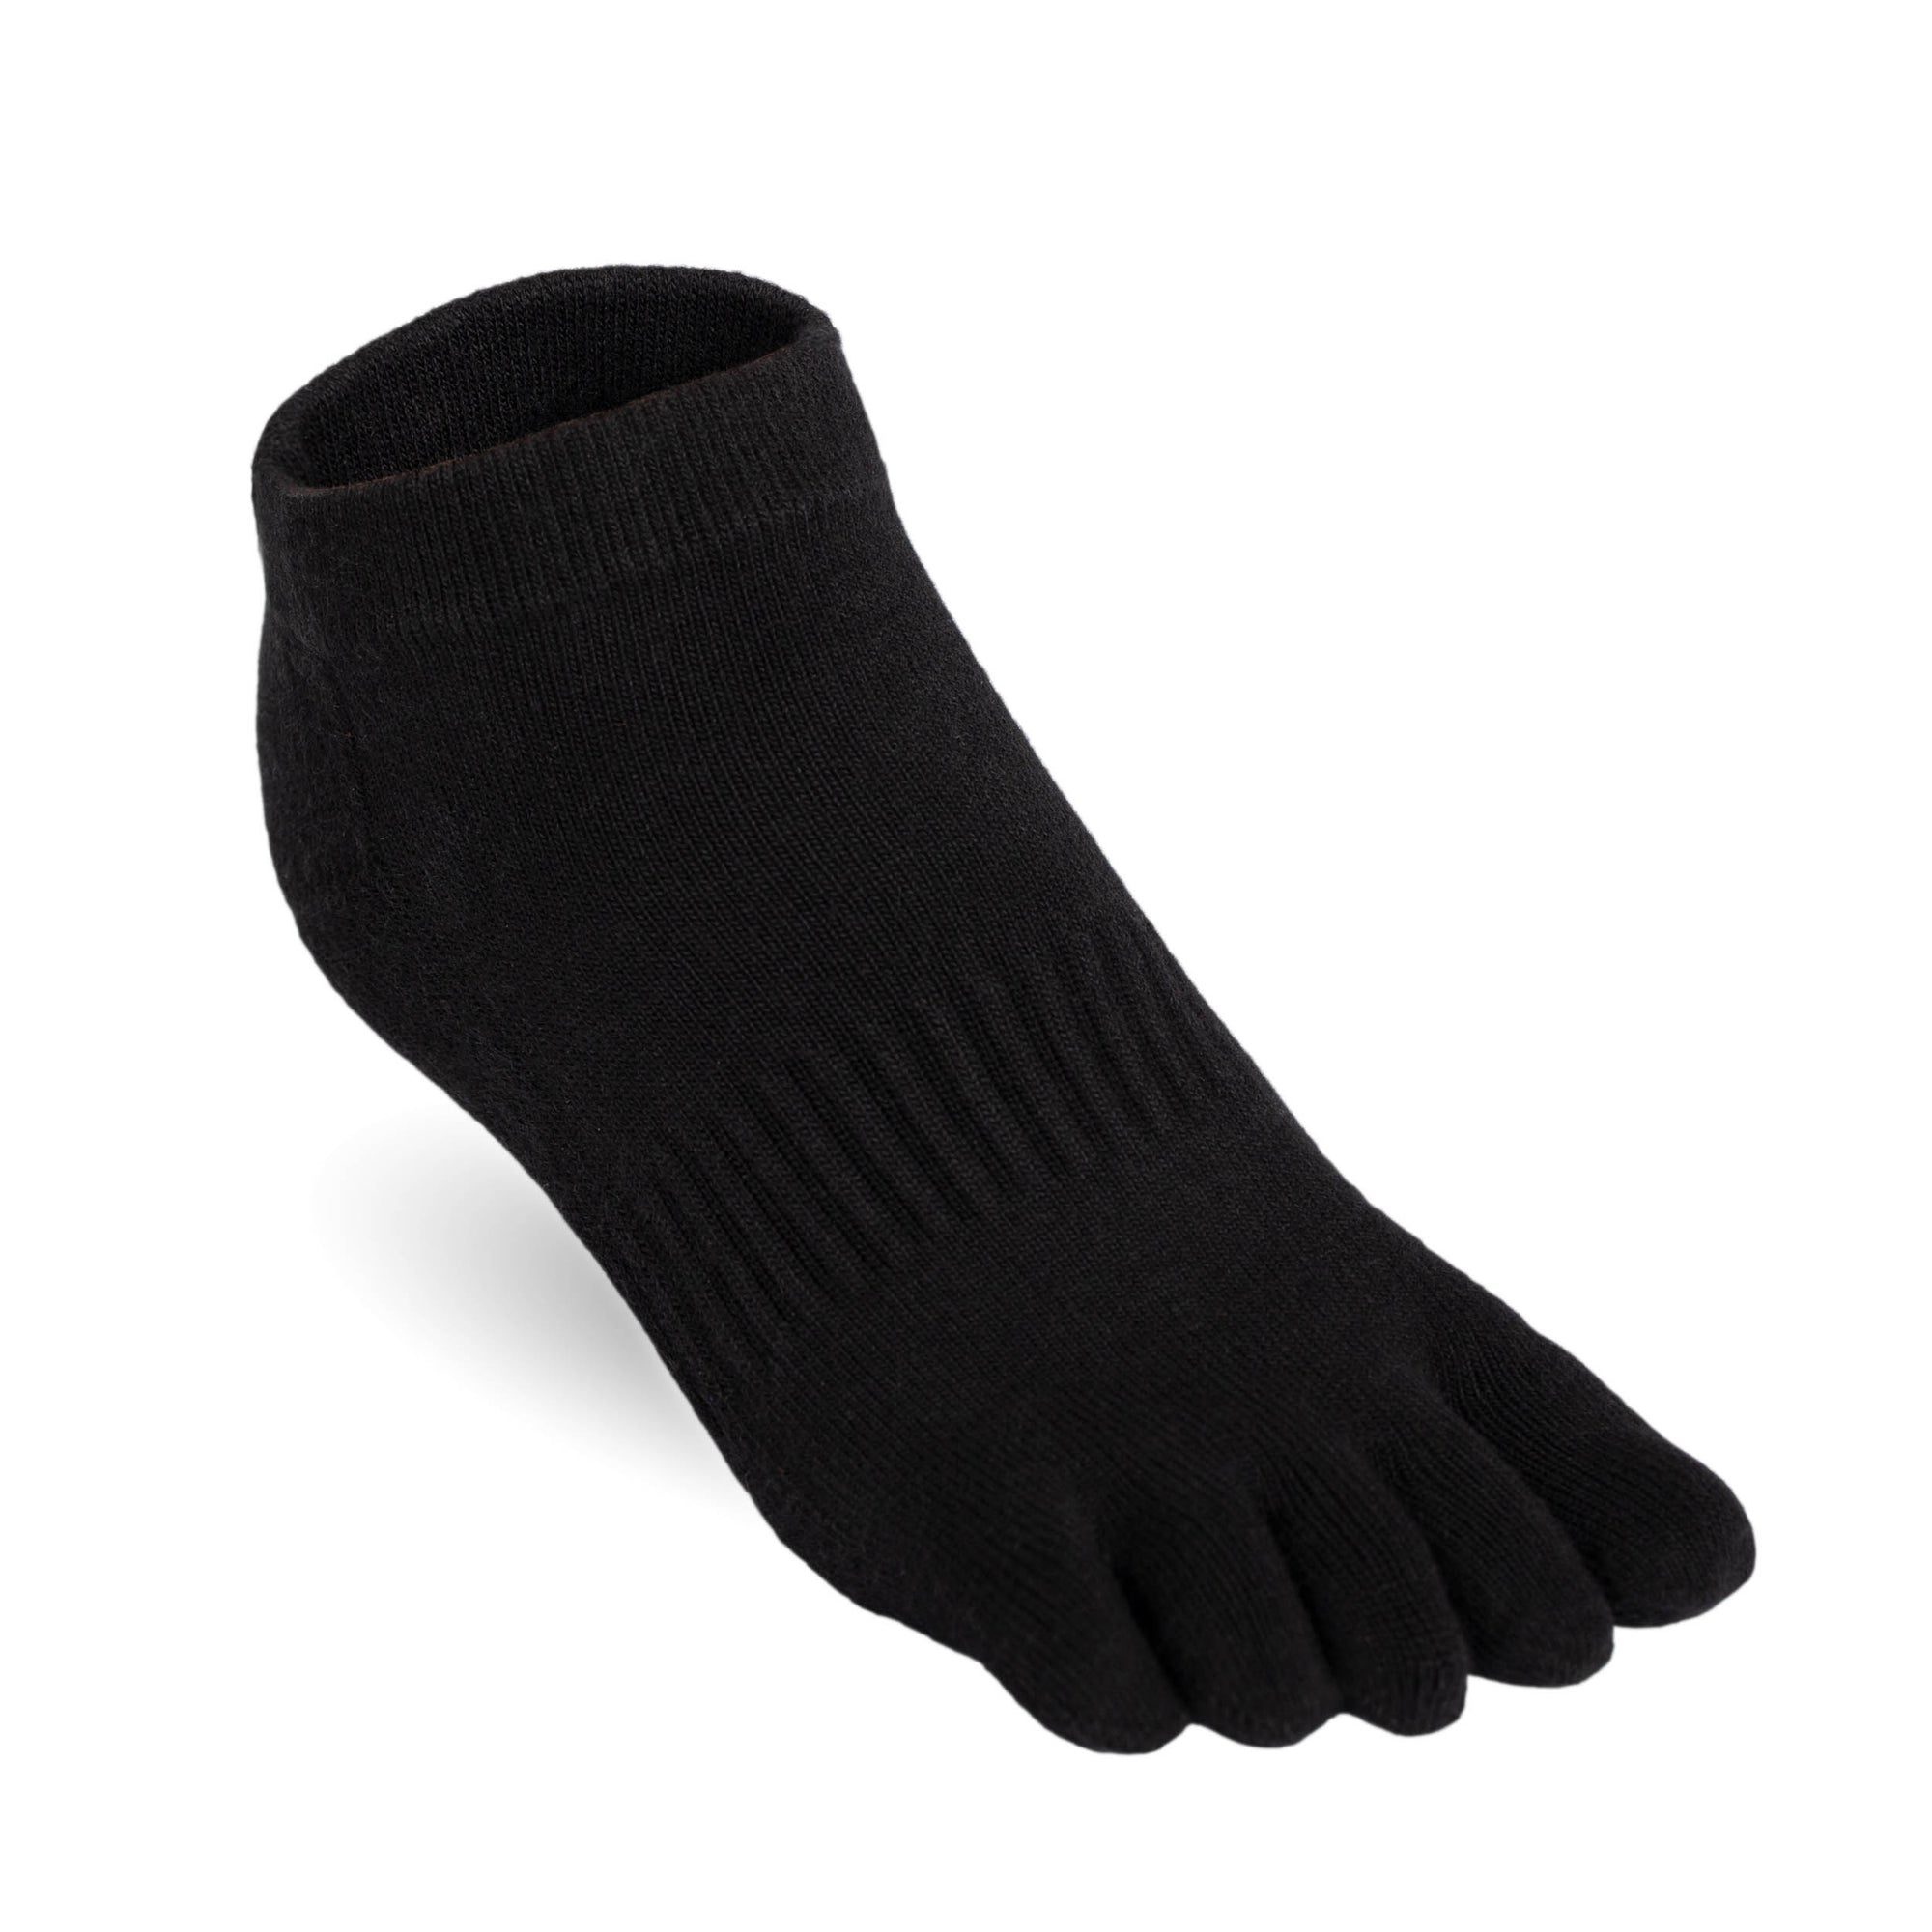 Black ankle socks with toes by Serasox